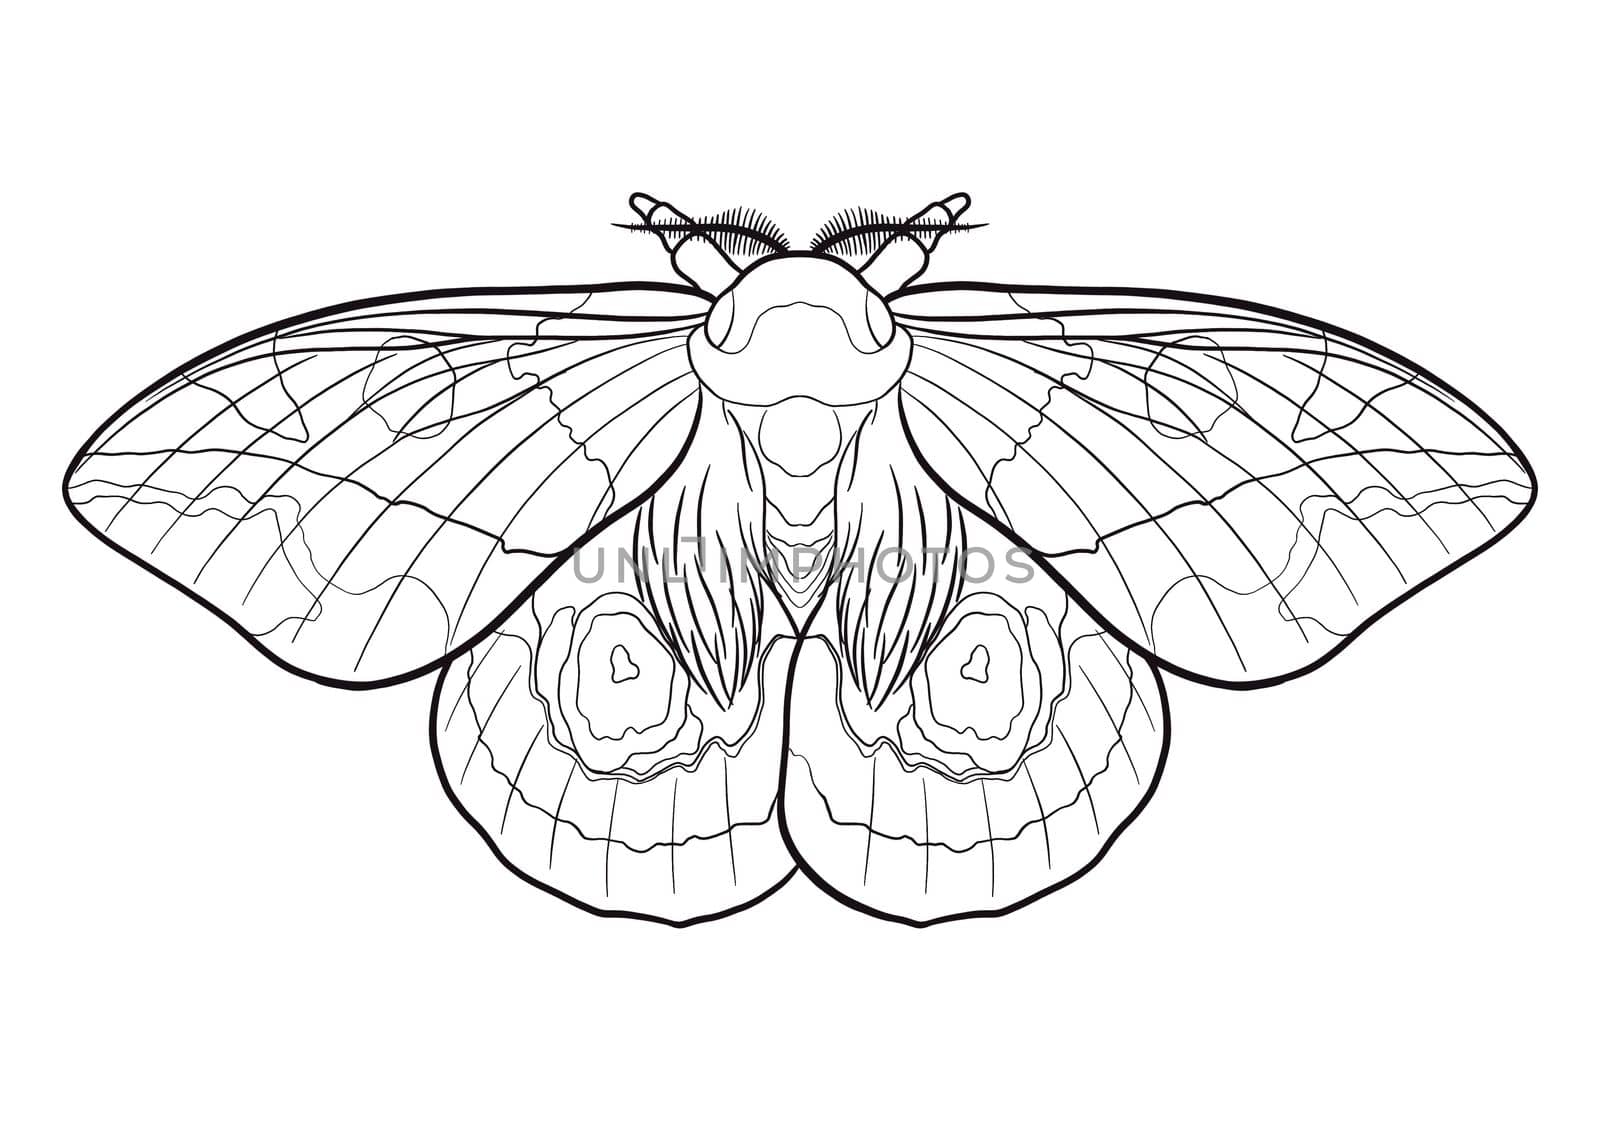 Children's coloring book, which depicts insects in a realistic way by kr0k0